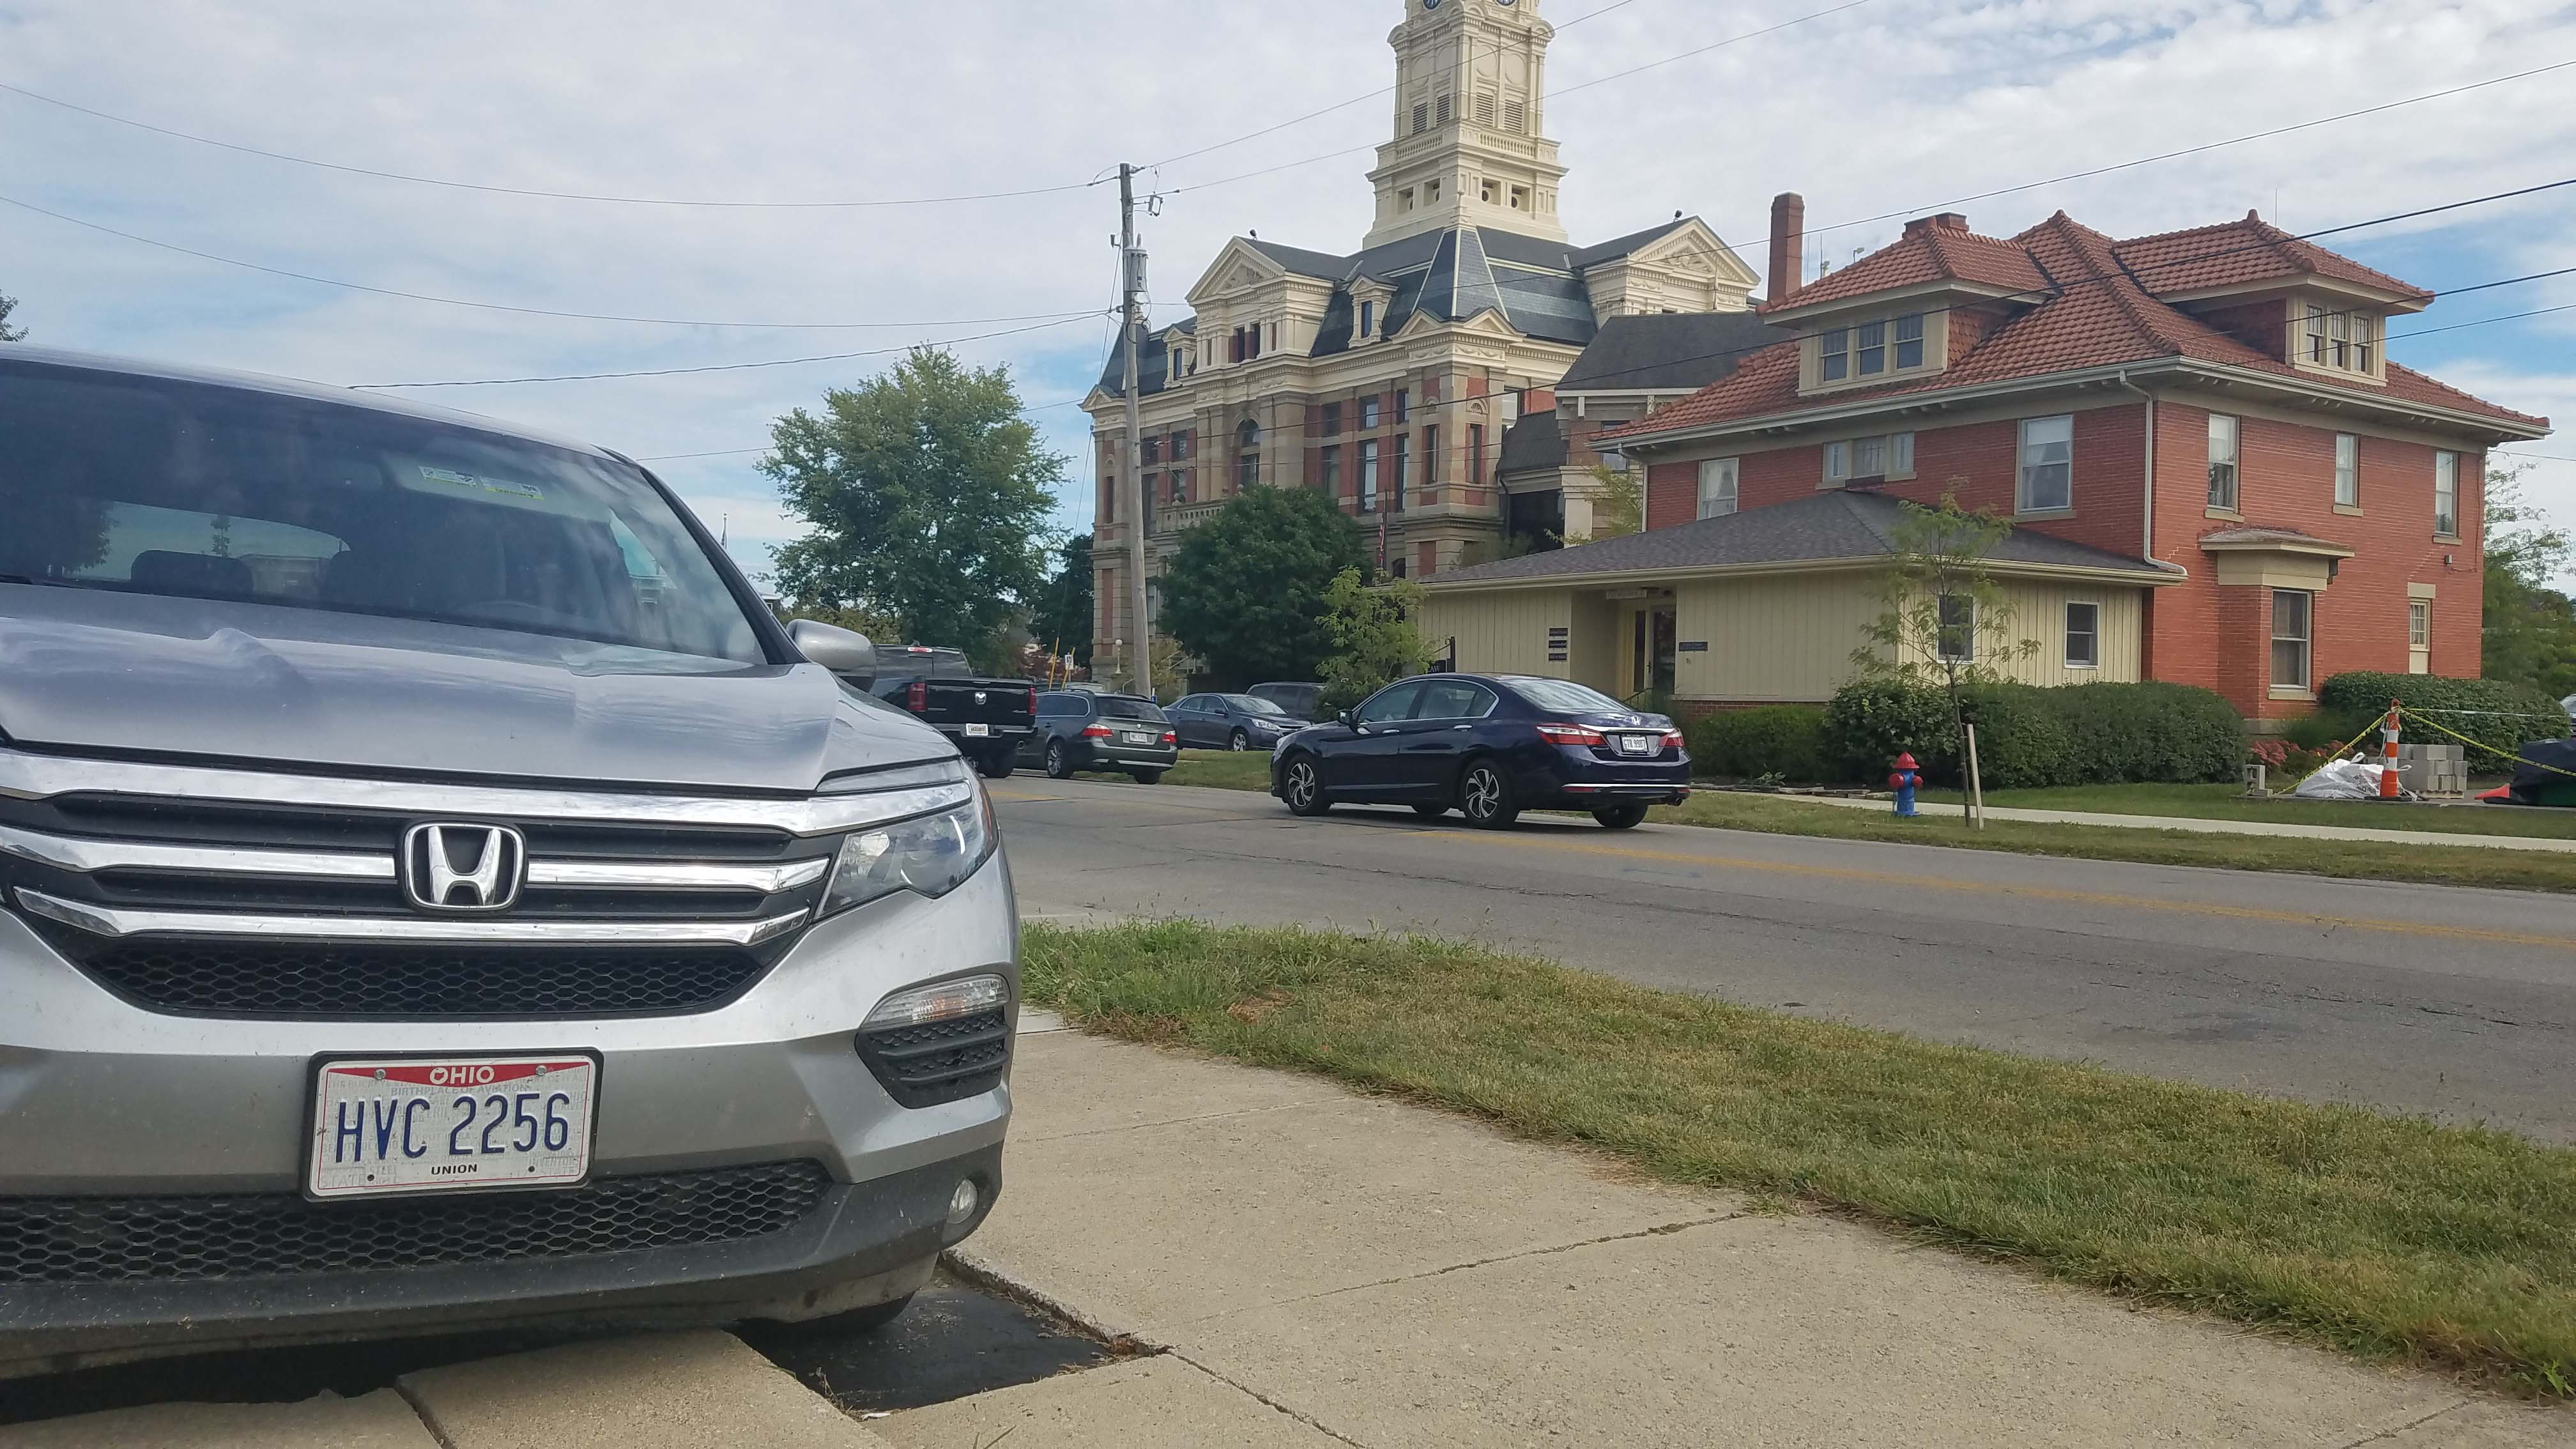 Honda has transformed the town of Marysville, Ohio - and Union and Logan counties - north of Columbus. A Honda Pilot  sits in front of the historic Union County Courthouse.